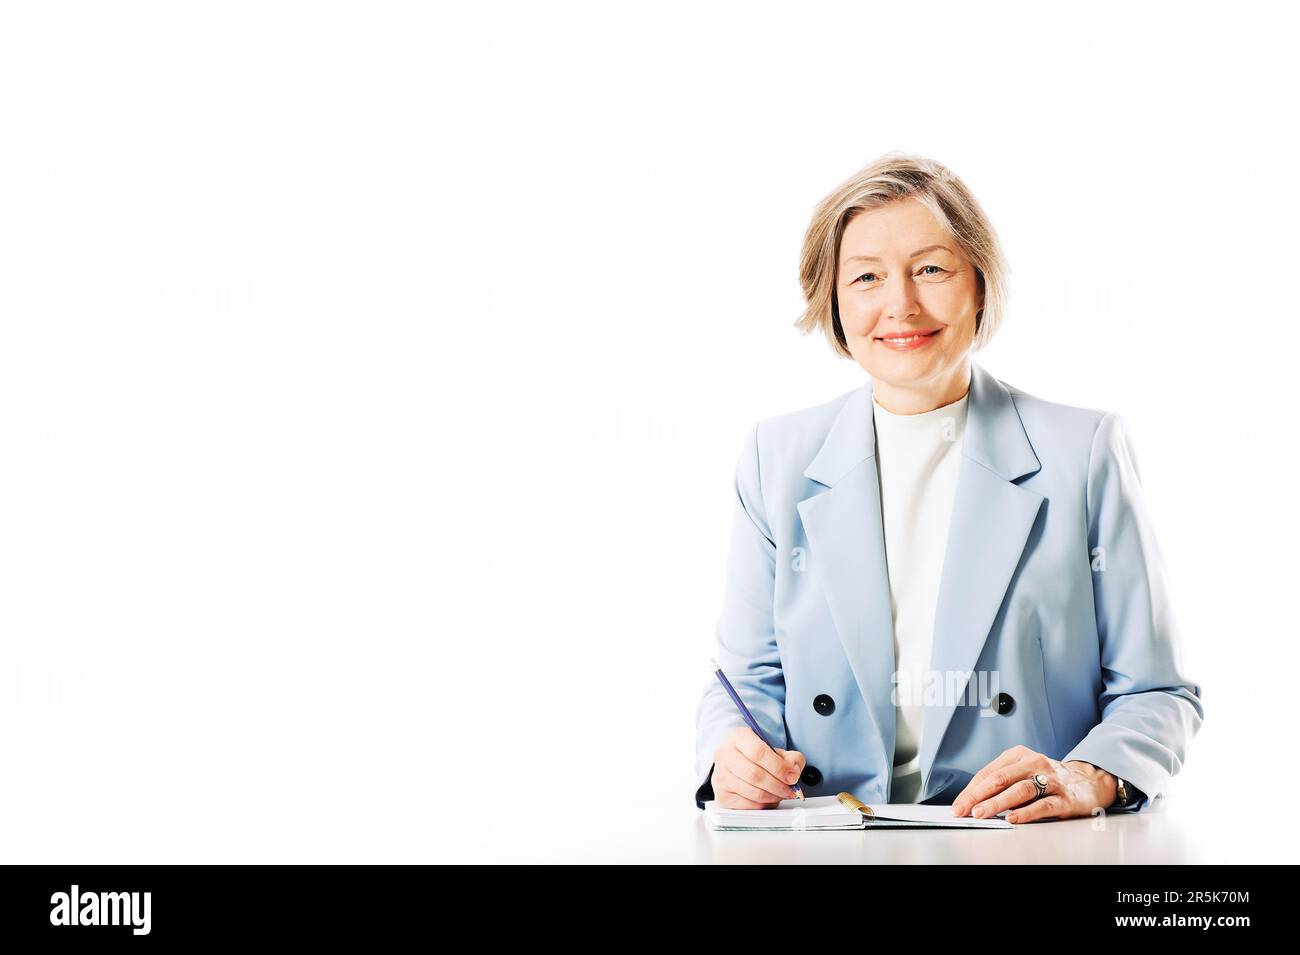 Studio portrait of middle age woman posing on white background, sitting at the desk and taking notes Stock Photo